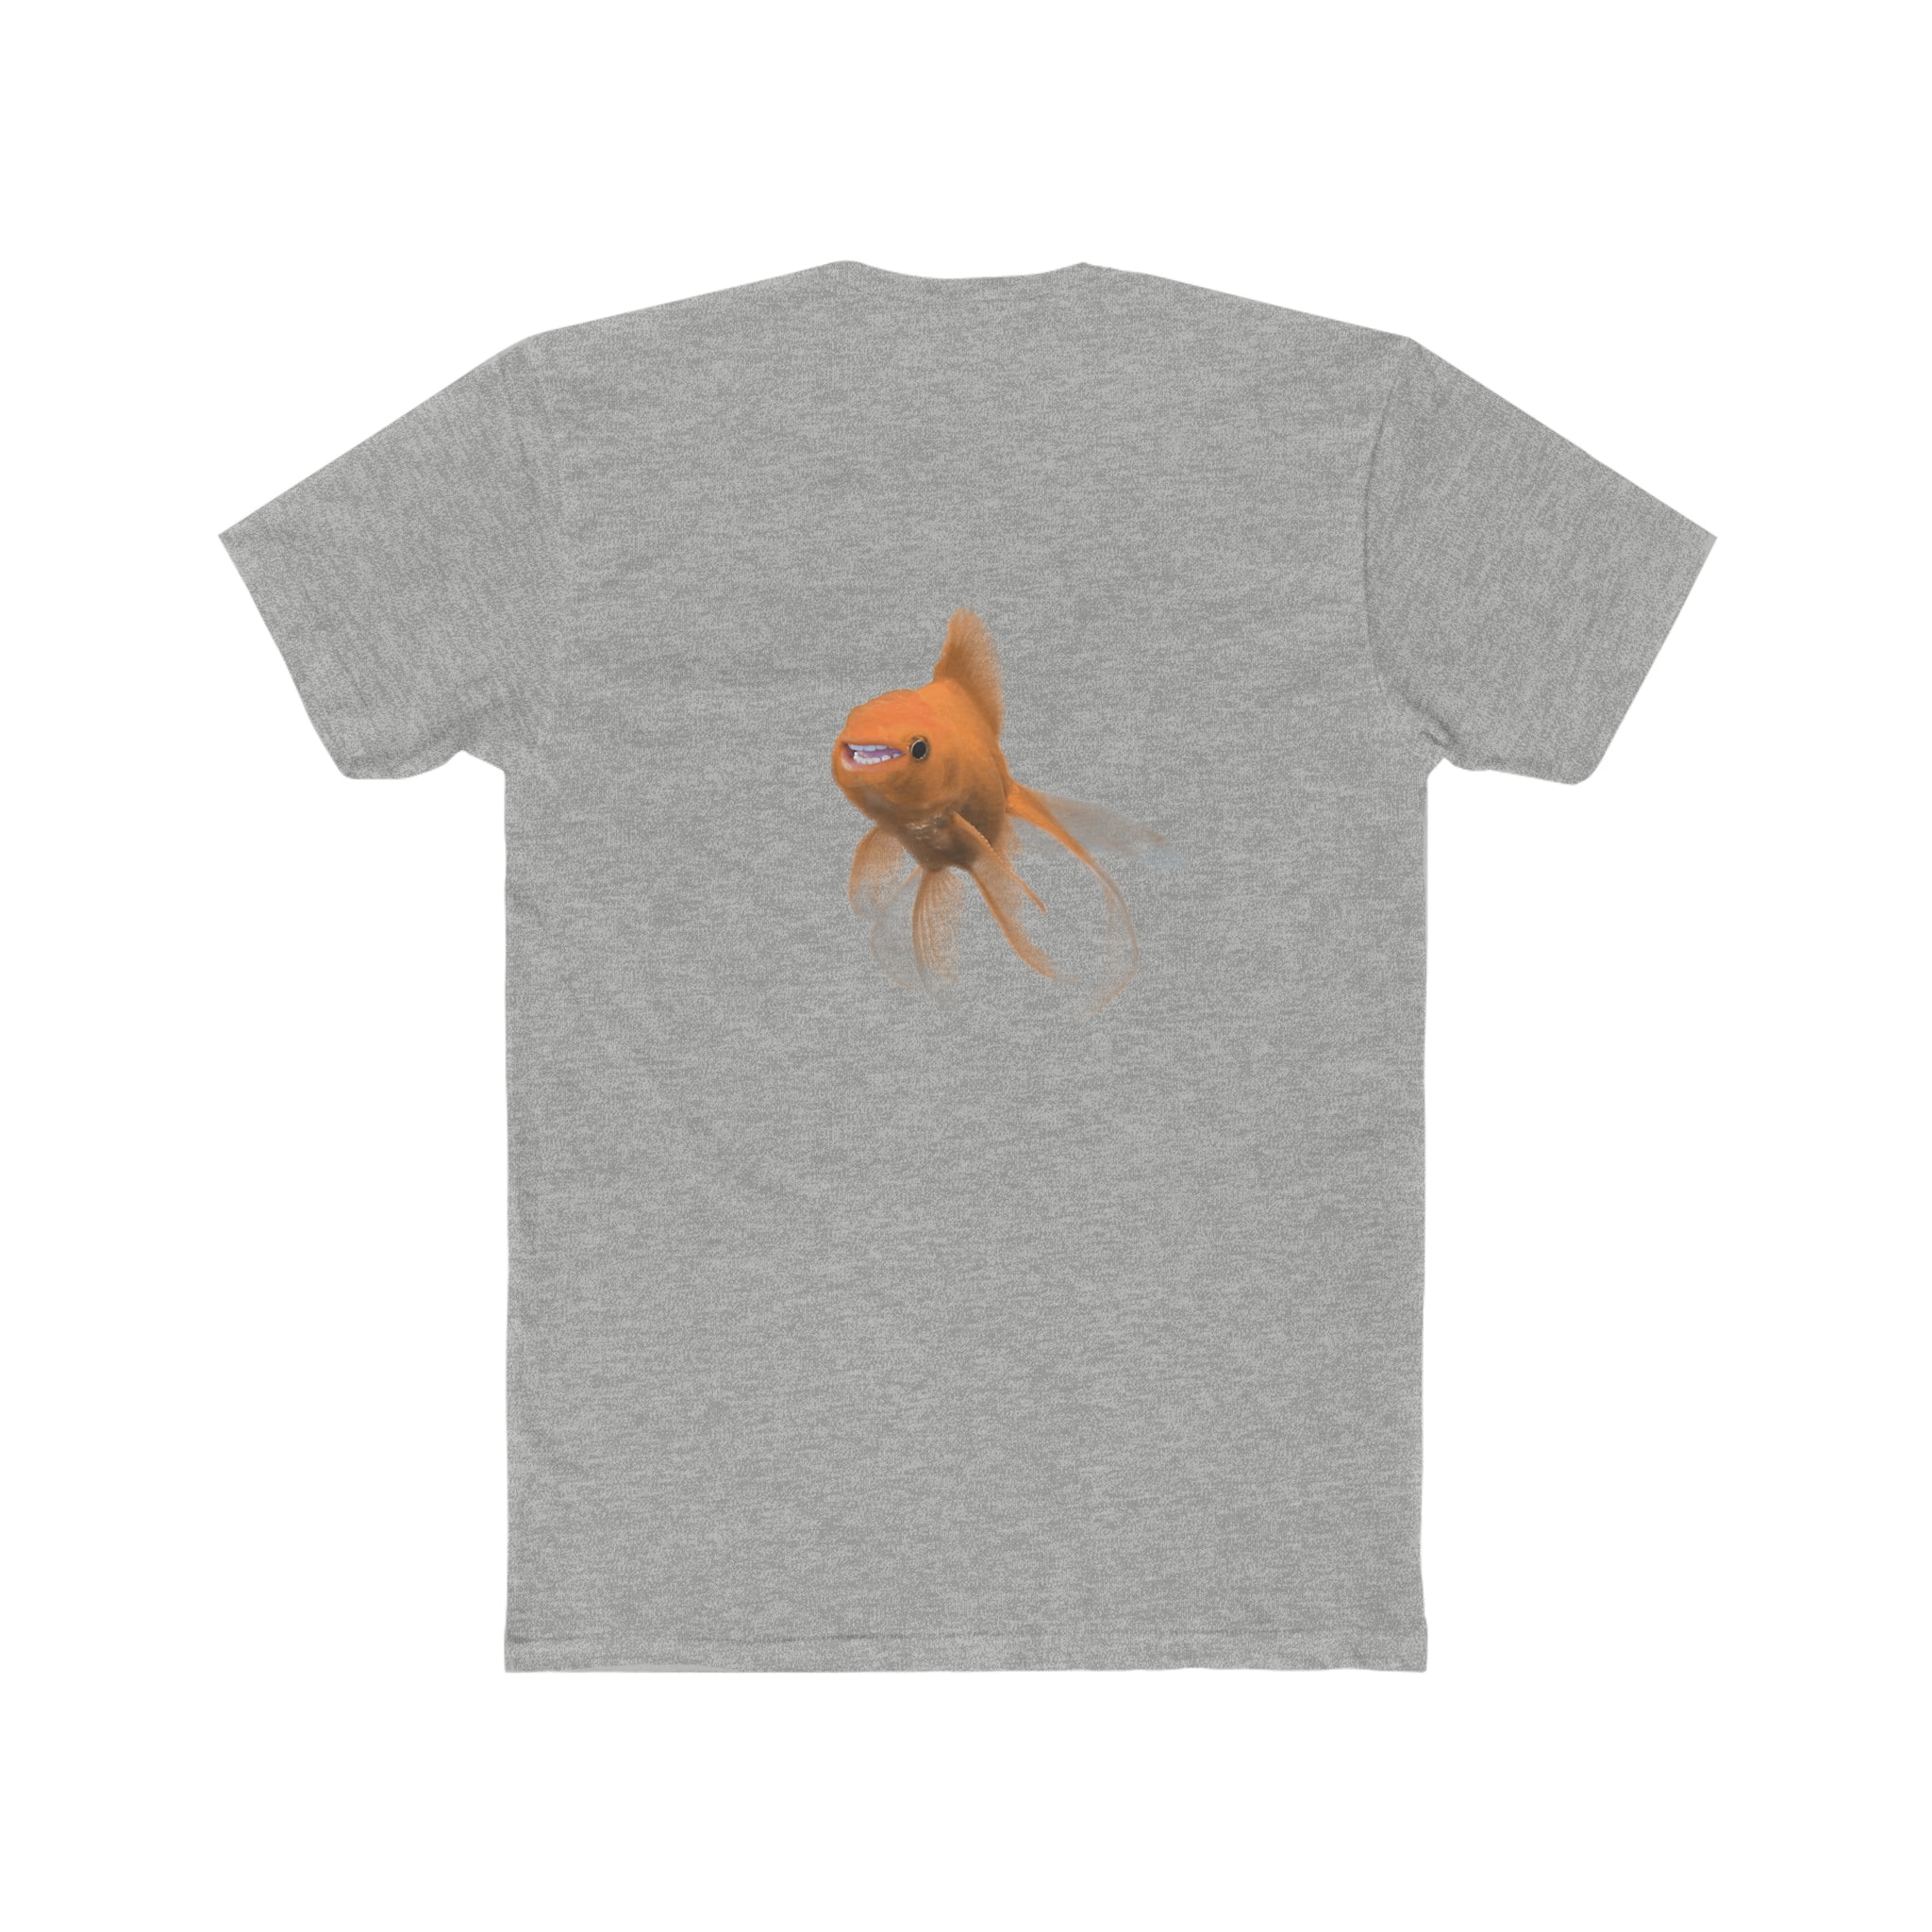 Hecklefish on the Back Cotton Crew Tee-9